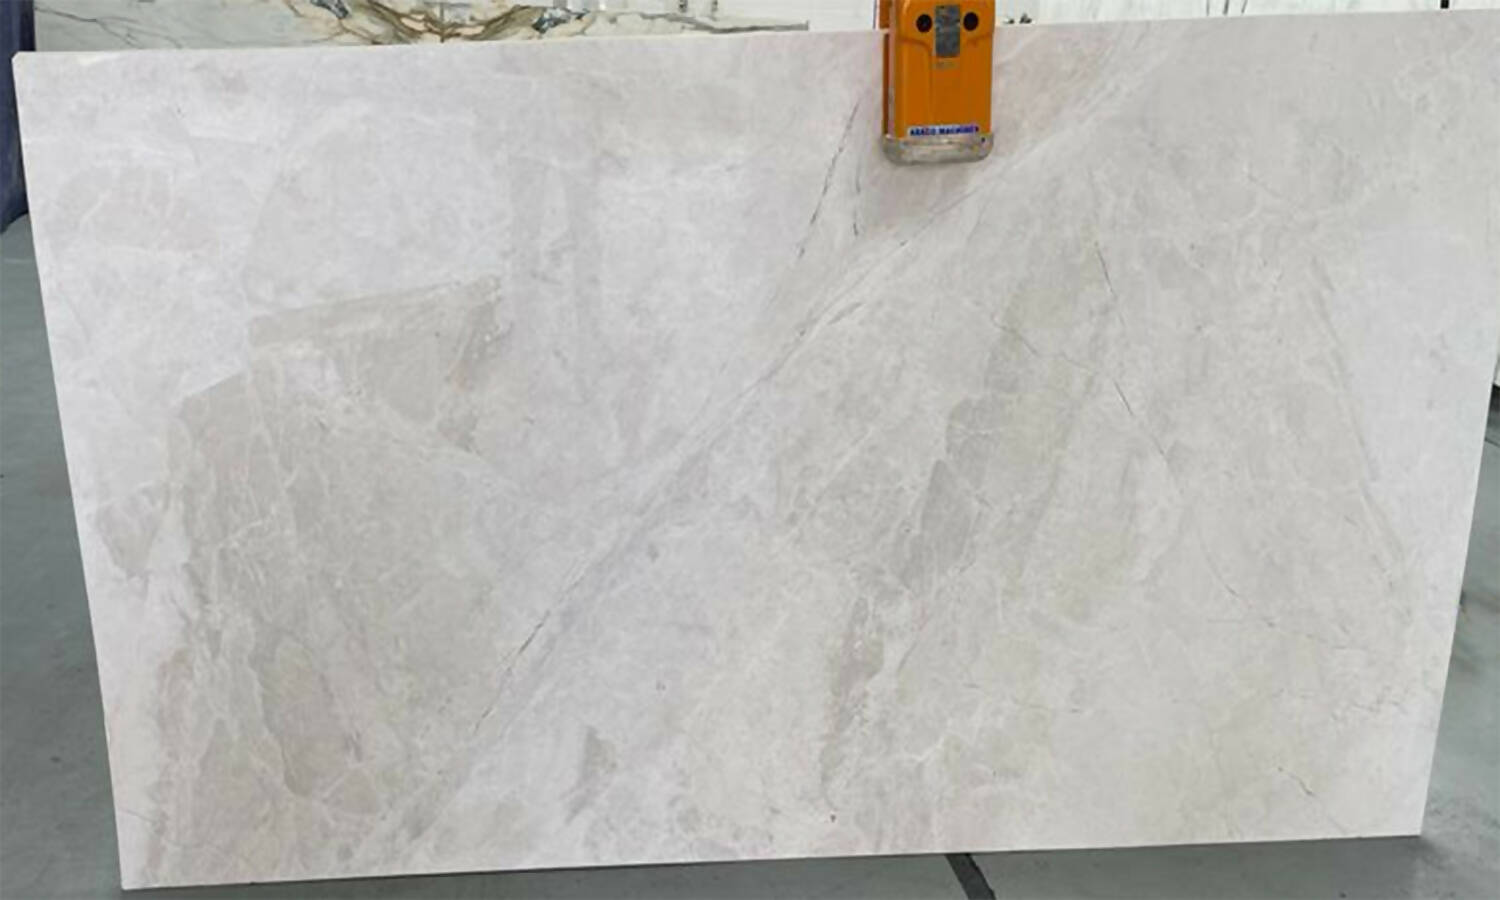 WHITE EMPERADOR MARBLE BOOKMATCH,Marble,Work-Tops,www.work-tops.com